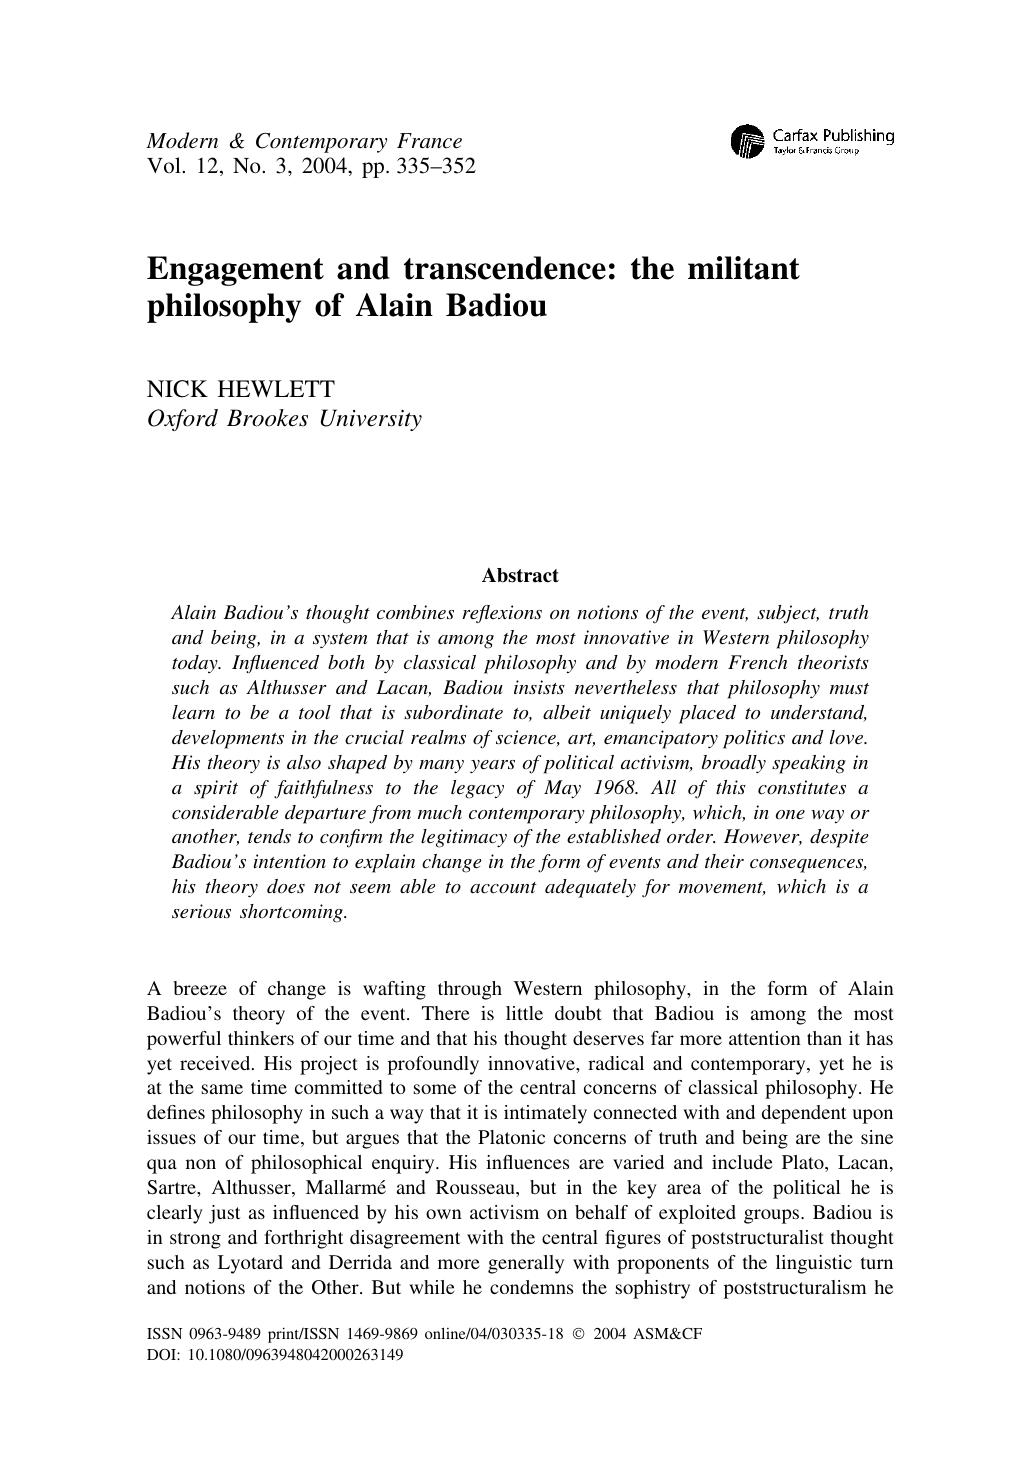 Engagement and transcendence: the militant philosophy of Alain Badiou - Paper